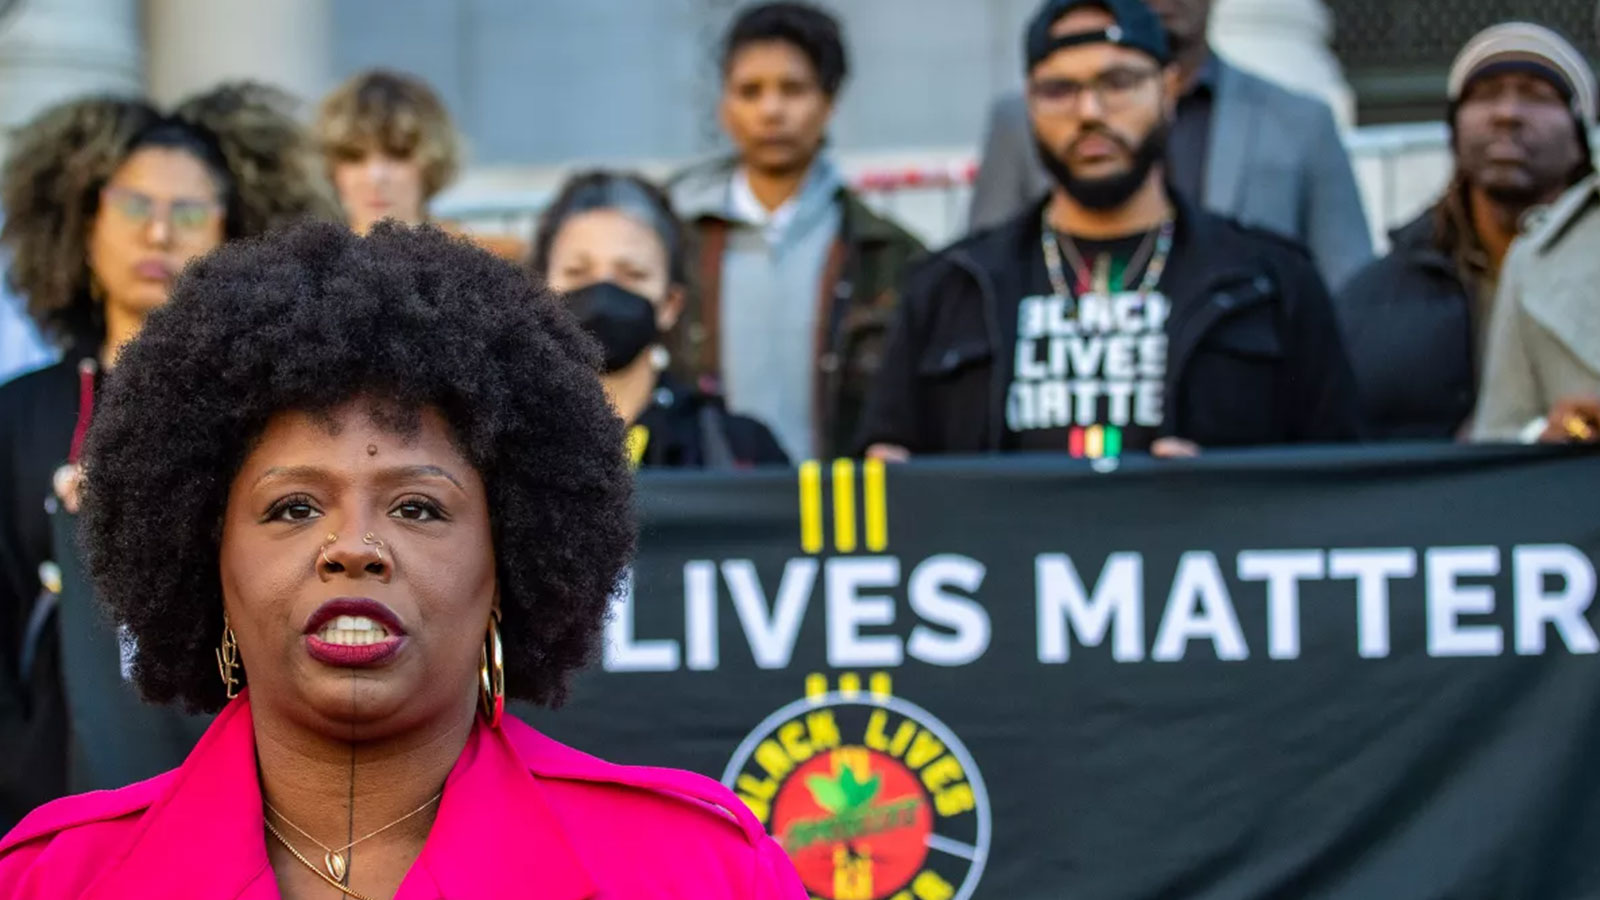 Patrisse Cullors, co-founder of the Black Lives Matter movement, speaks at a news conference outside L.A. City Hall in January after her cousin, Keenan Anderson, died following a violent encounter with the LAPD. 